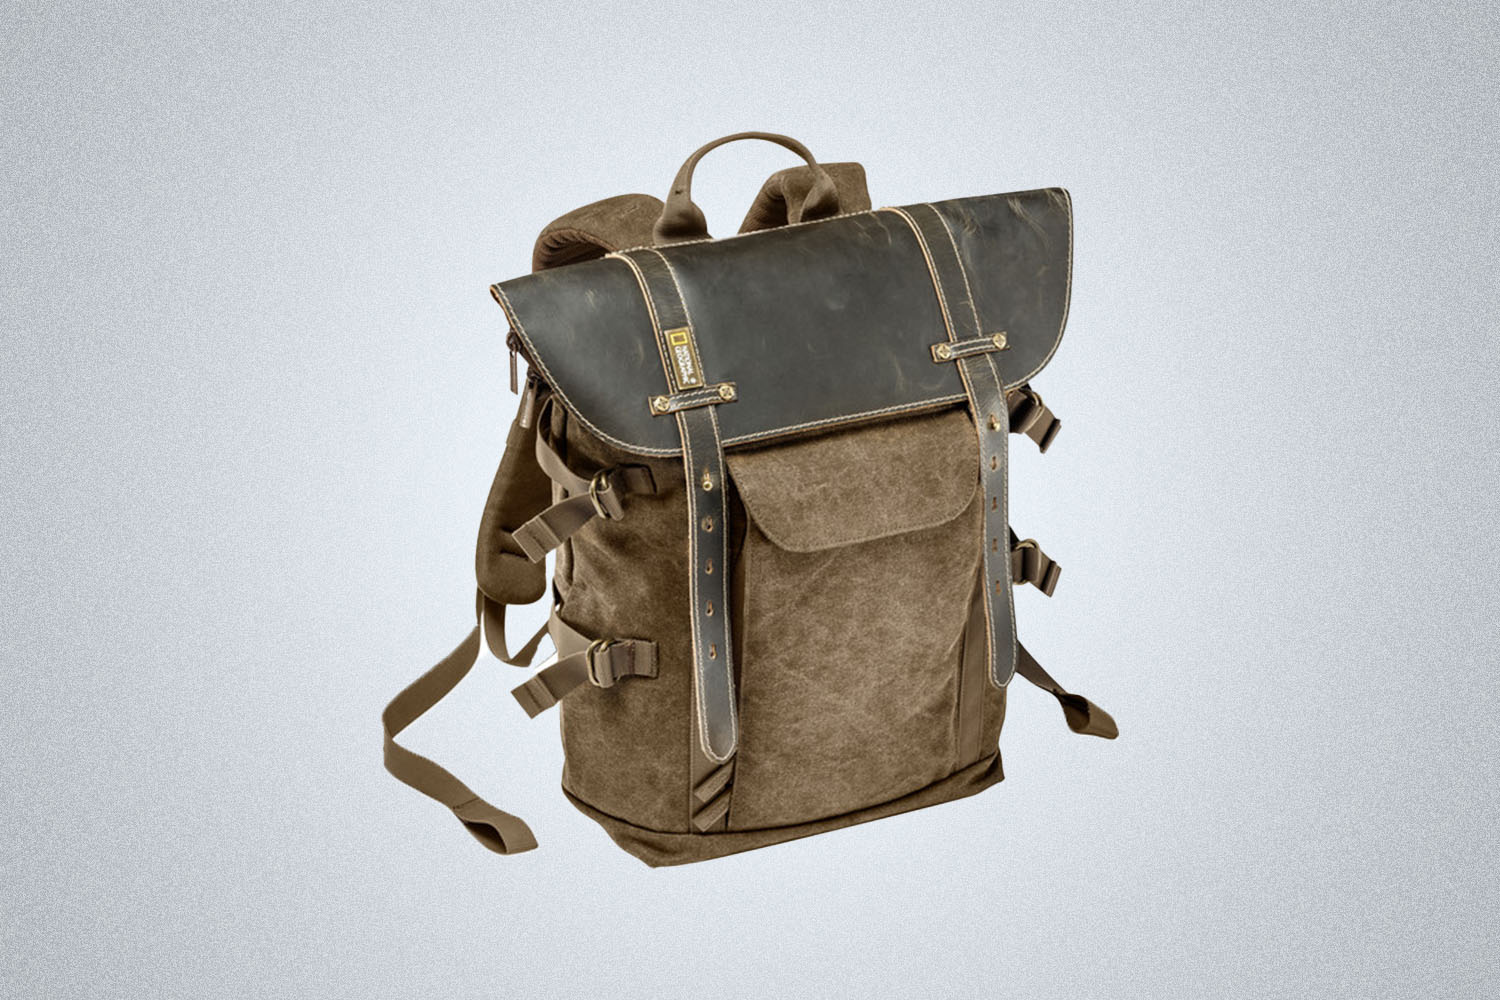 The National Geographic Camera Rucksack on a gray background